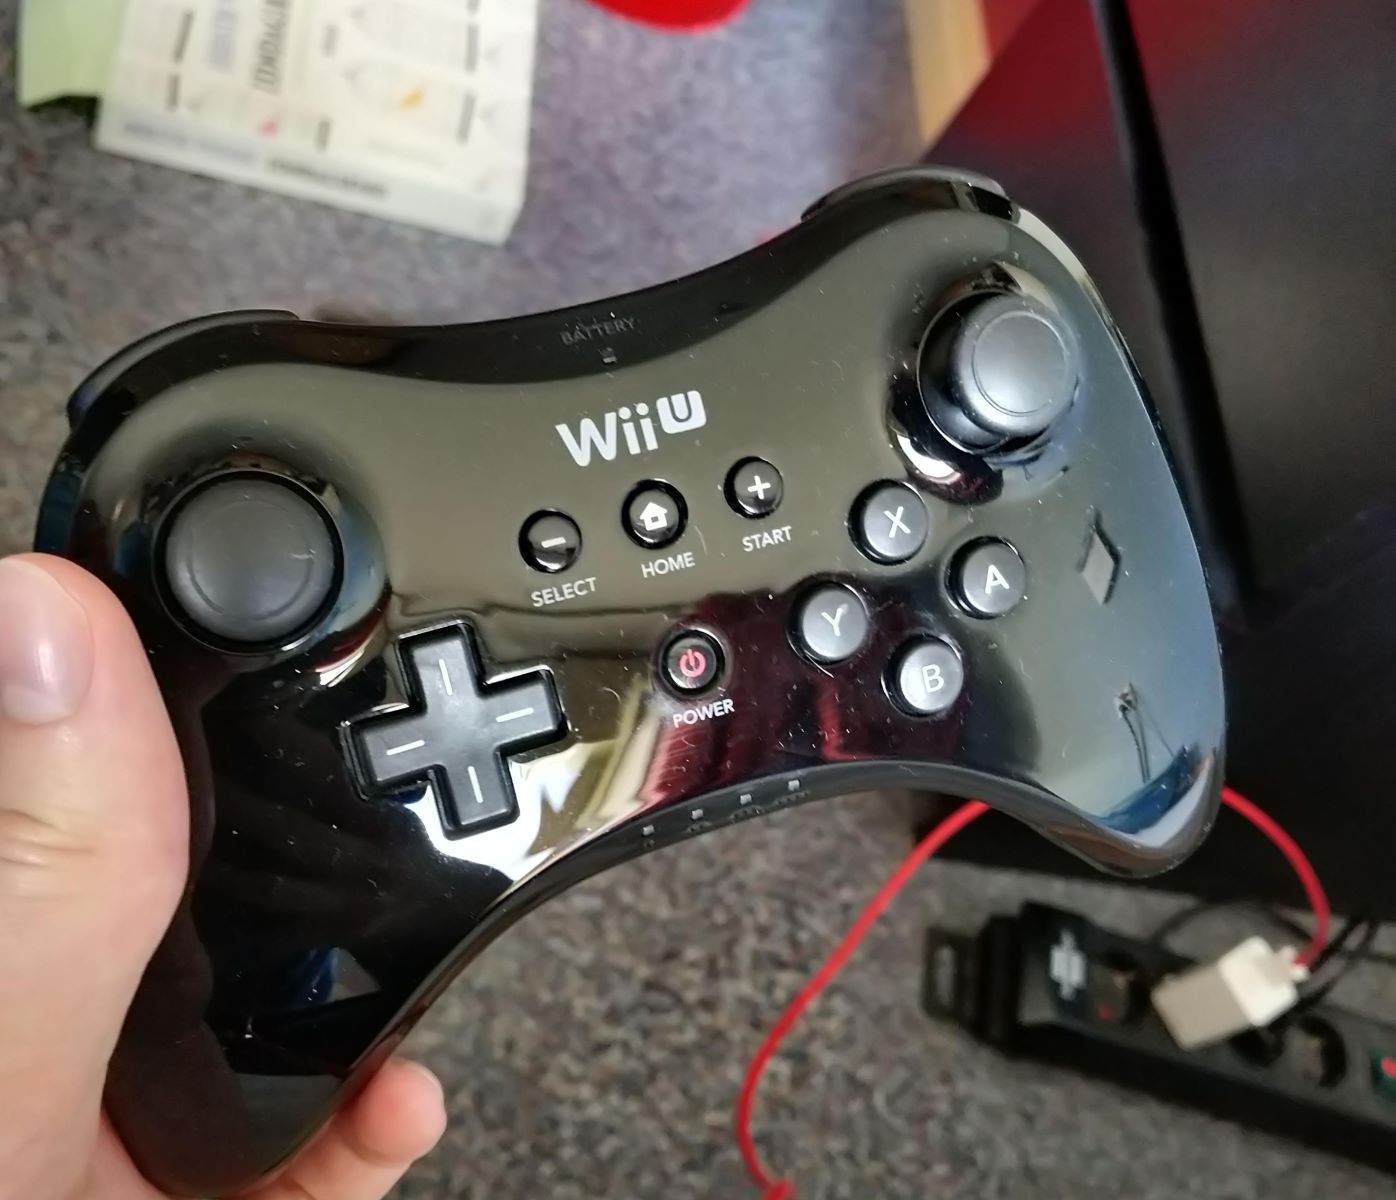 How Do You Connect A Wii U Game Controller To A PC?